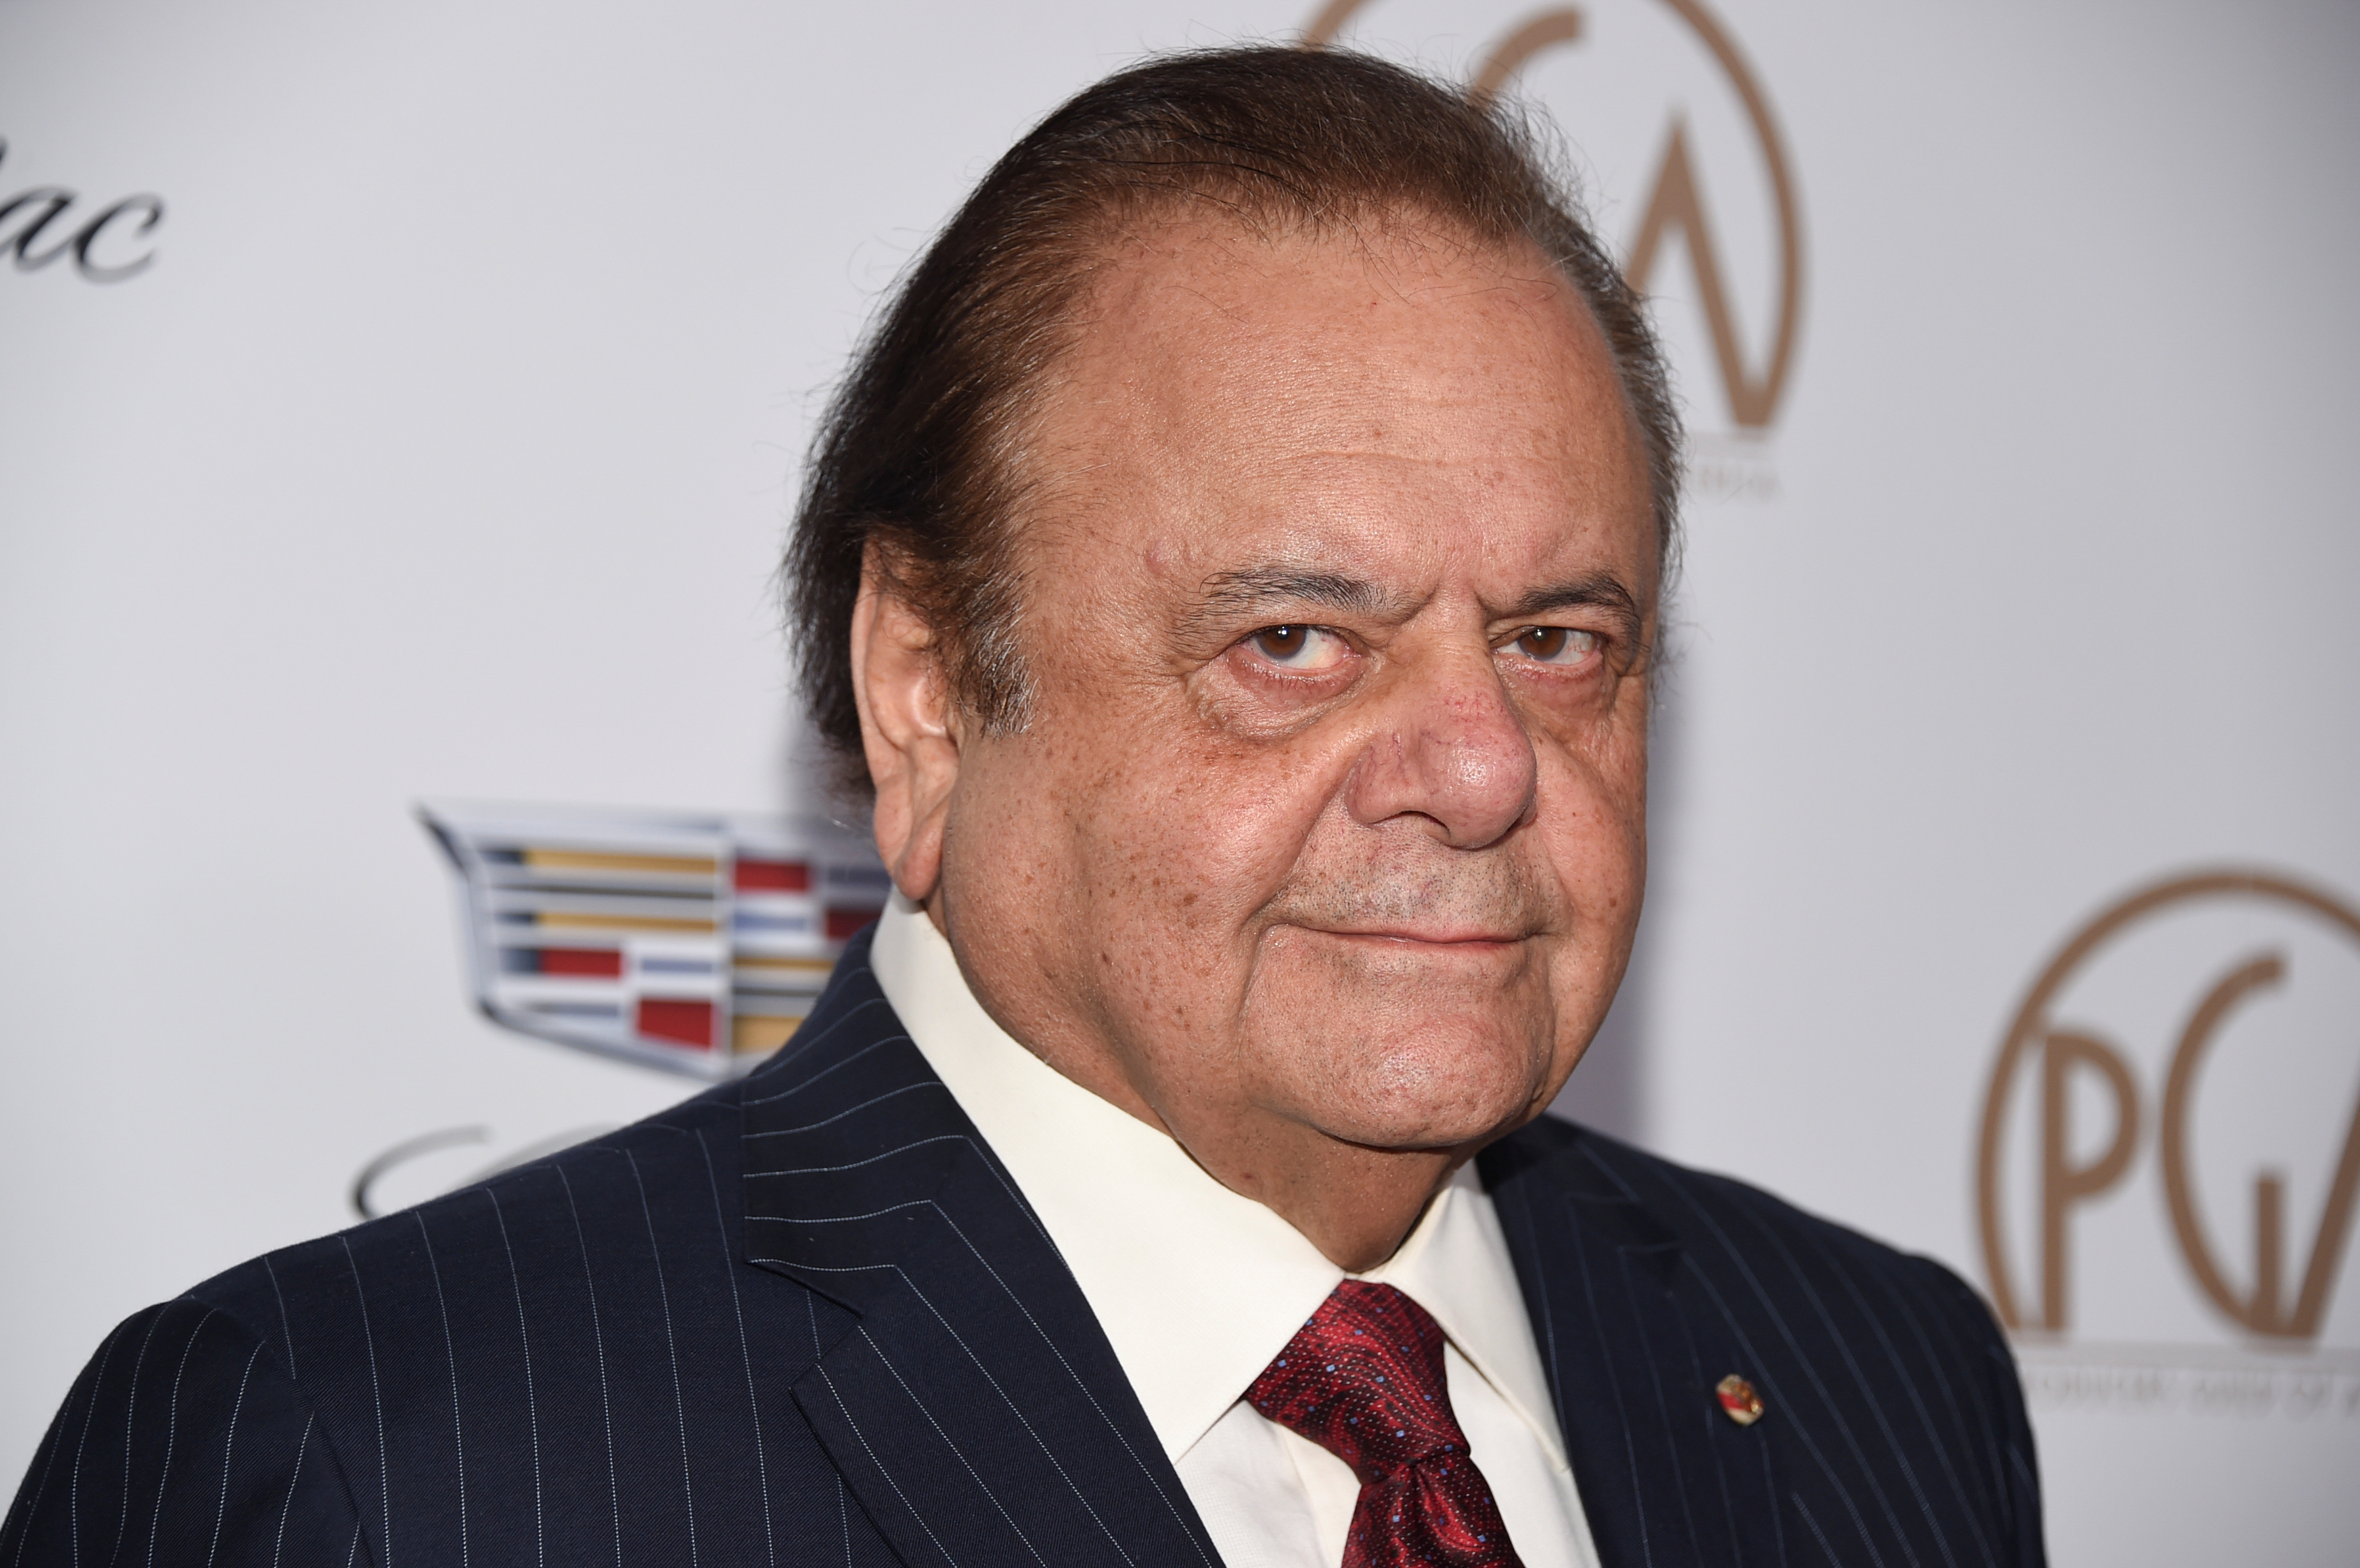 Paul Sorvino attends the 29th annual Producers Guild Awards in Beverly Hills, California